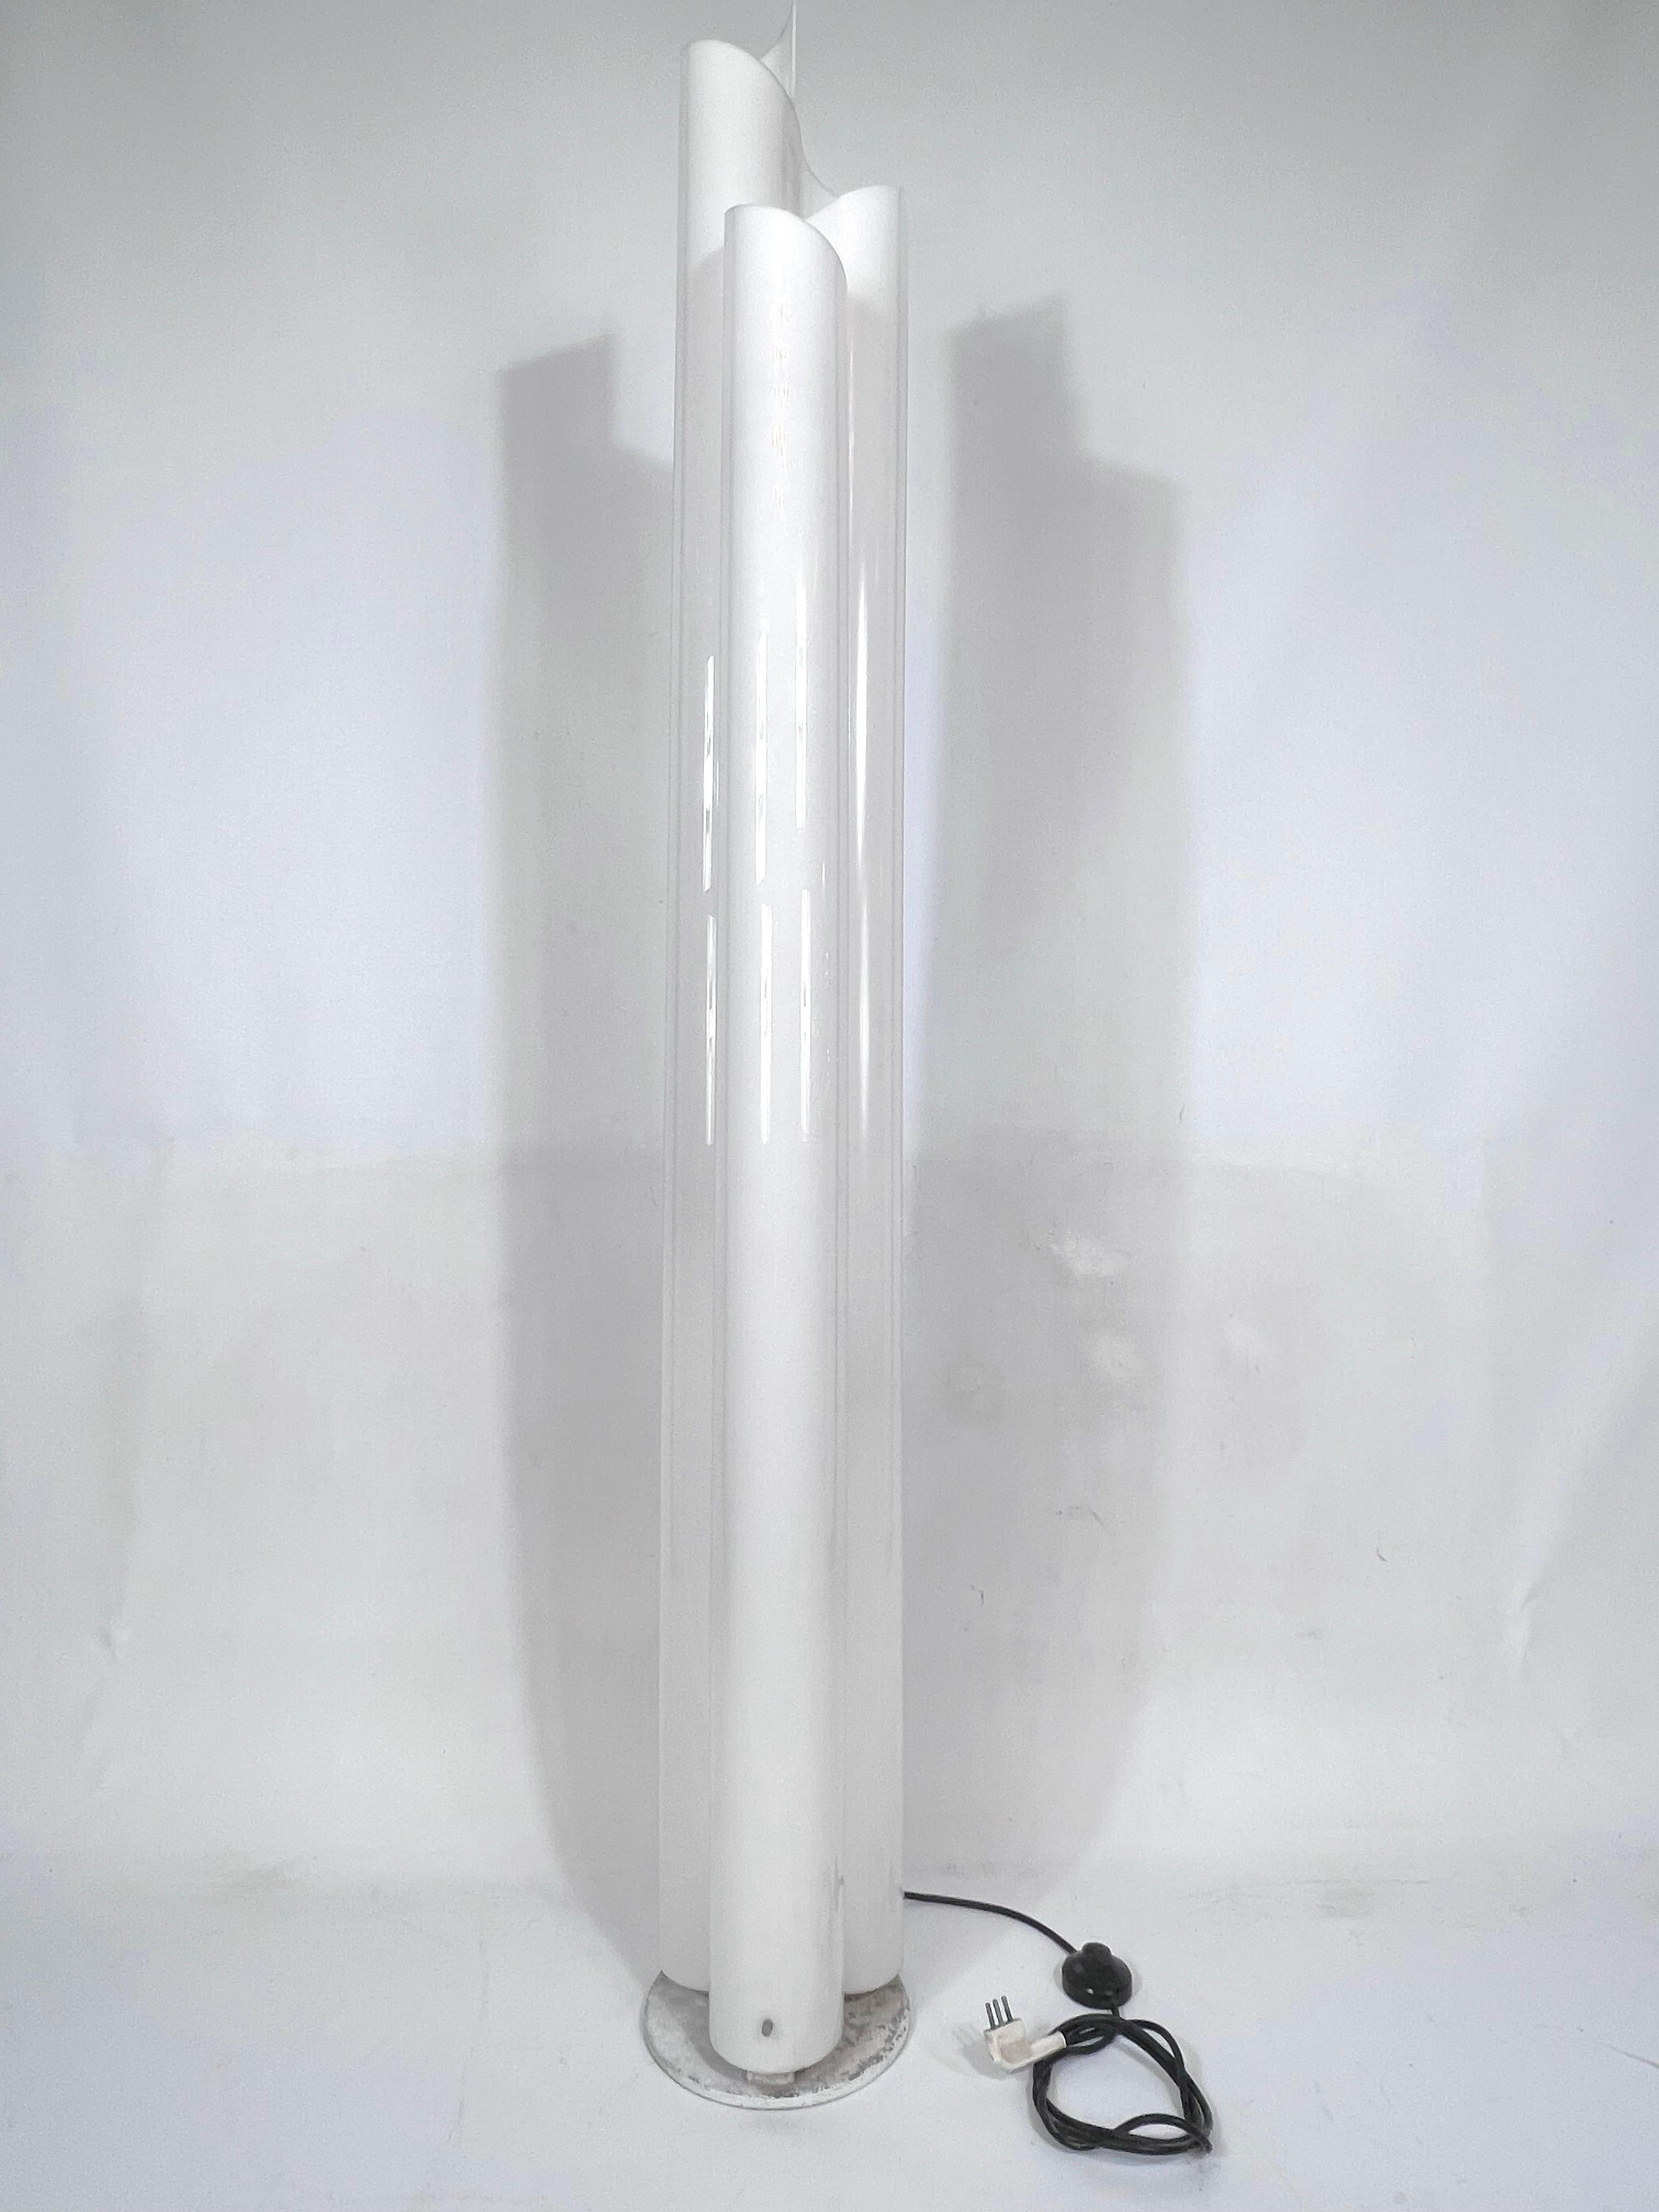 Great vintage condition for this 1st edition with neon of the iconic Chimera floor lamp designed by Vico Magistretti for Artemide and produced in Italy during the 60s. Metal base with evident trace of age and use. Plexiglass diffuser with no cracks